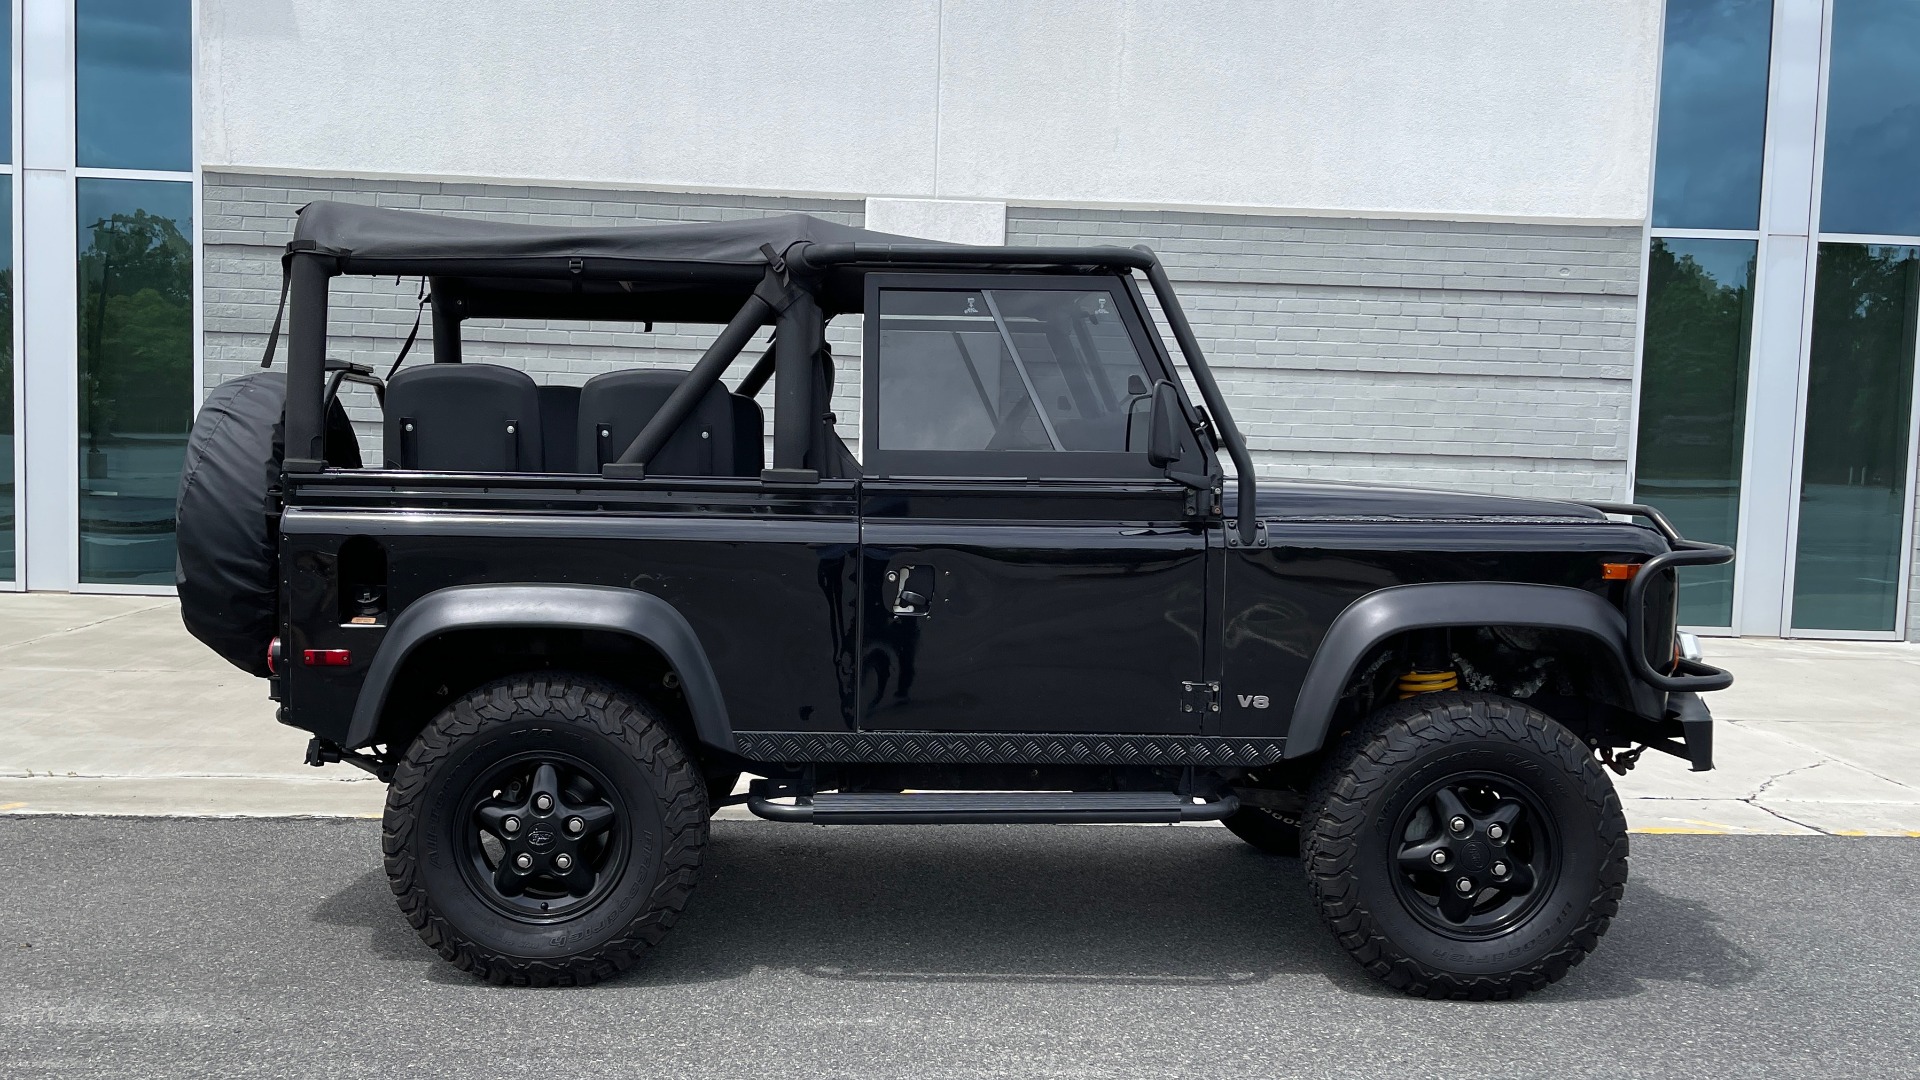 Used 1995 Land Rover DEFENDER 90 4x4 / 3.9L V8 / SOFT-TOP / 5-SPD MANUAL / RUNS GREAT for sale Sold at Formula Imports in Charlotte NC 28227 9